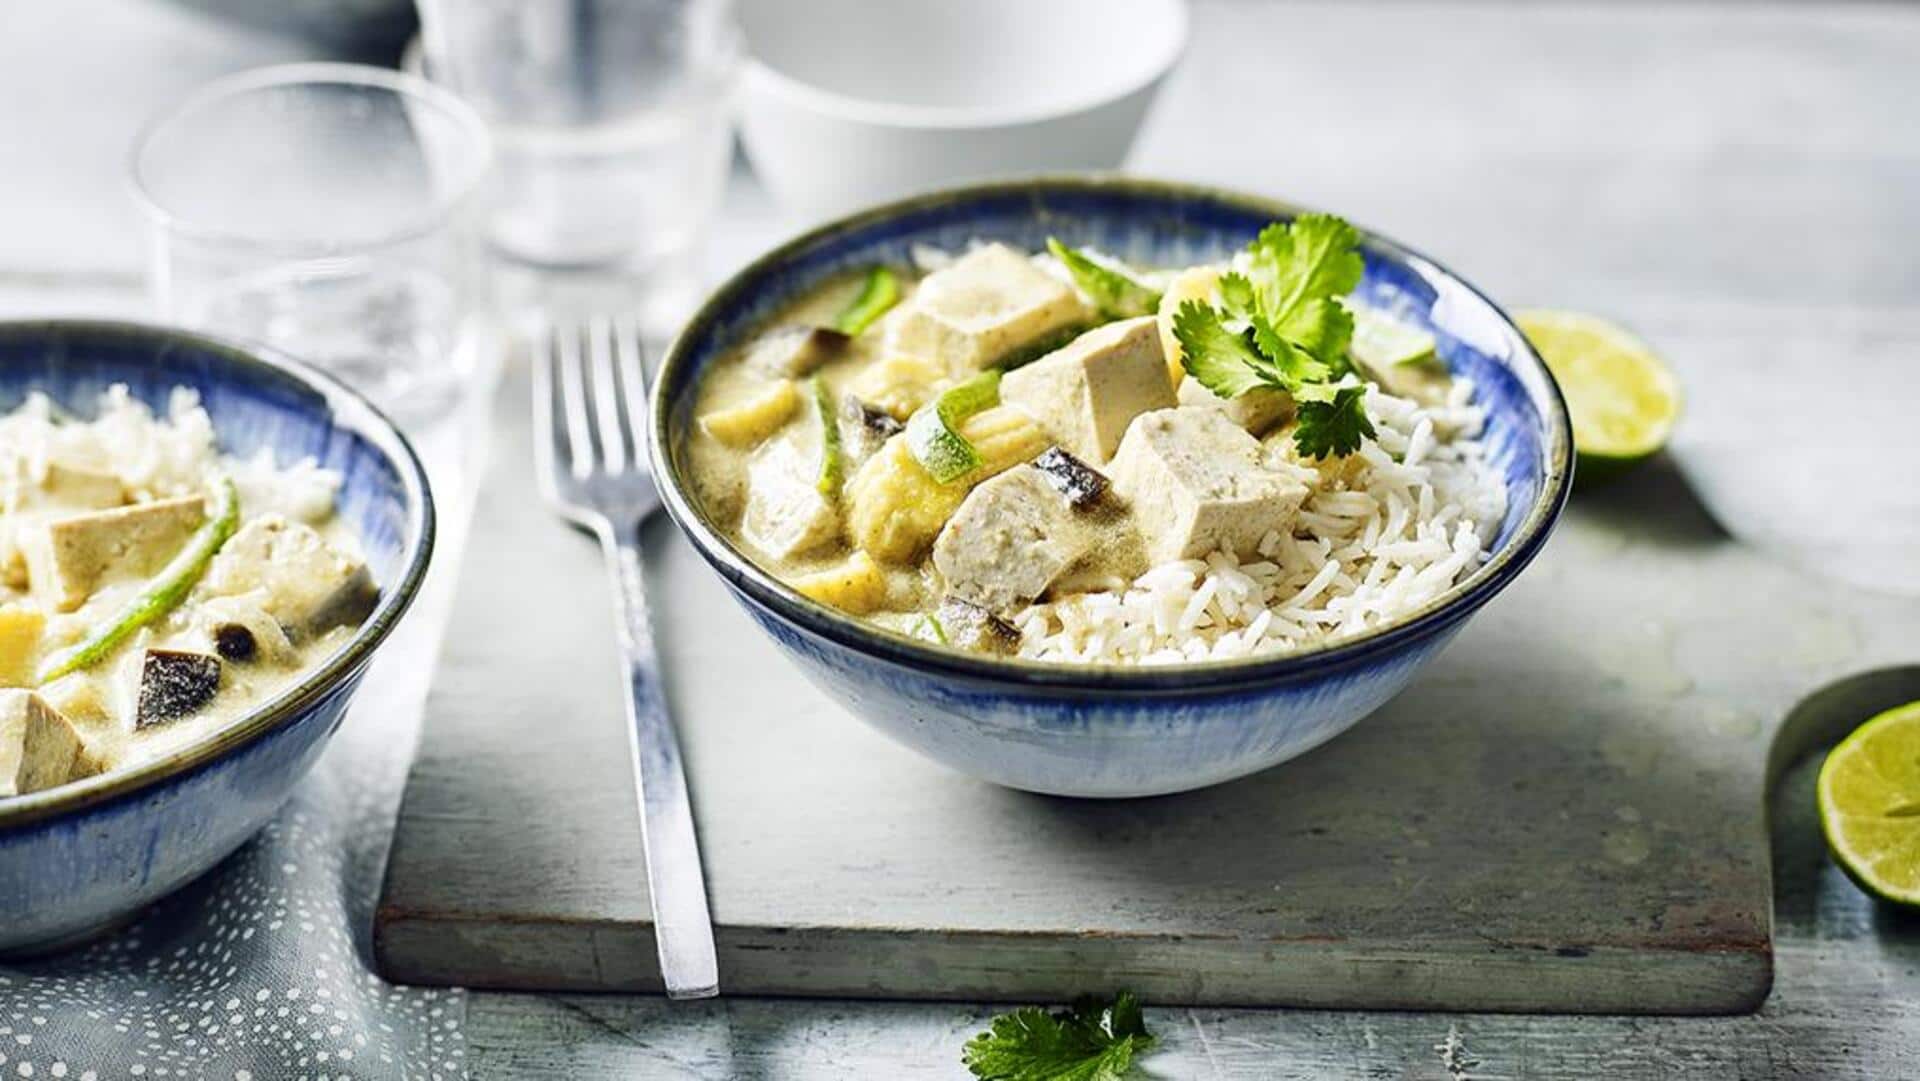 Recipe: Serve your guests this tempting Thai tofu green curry